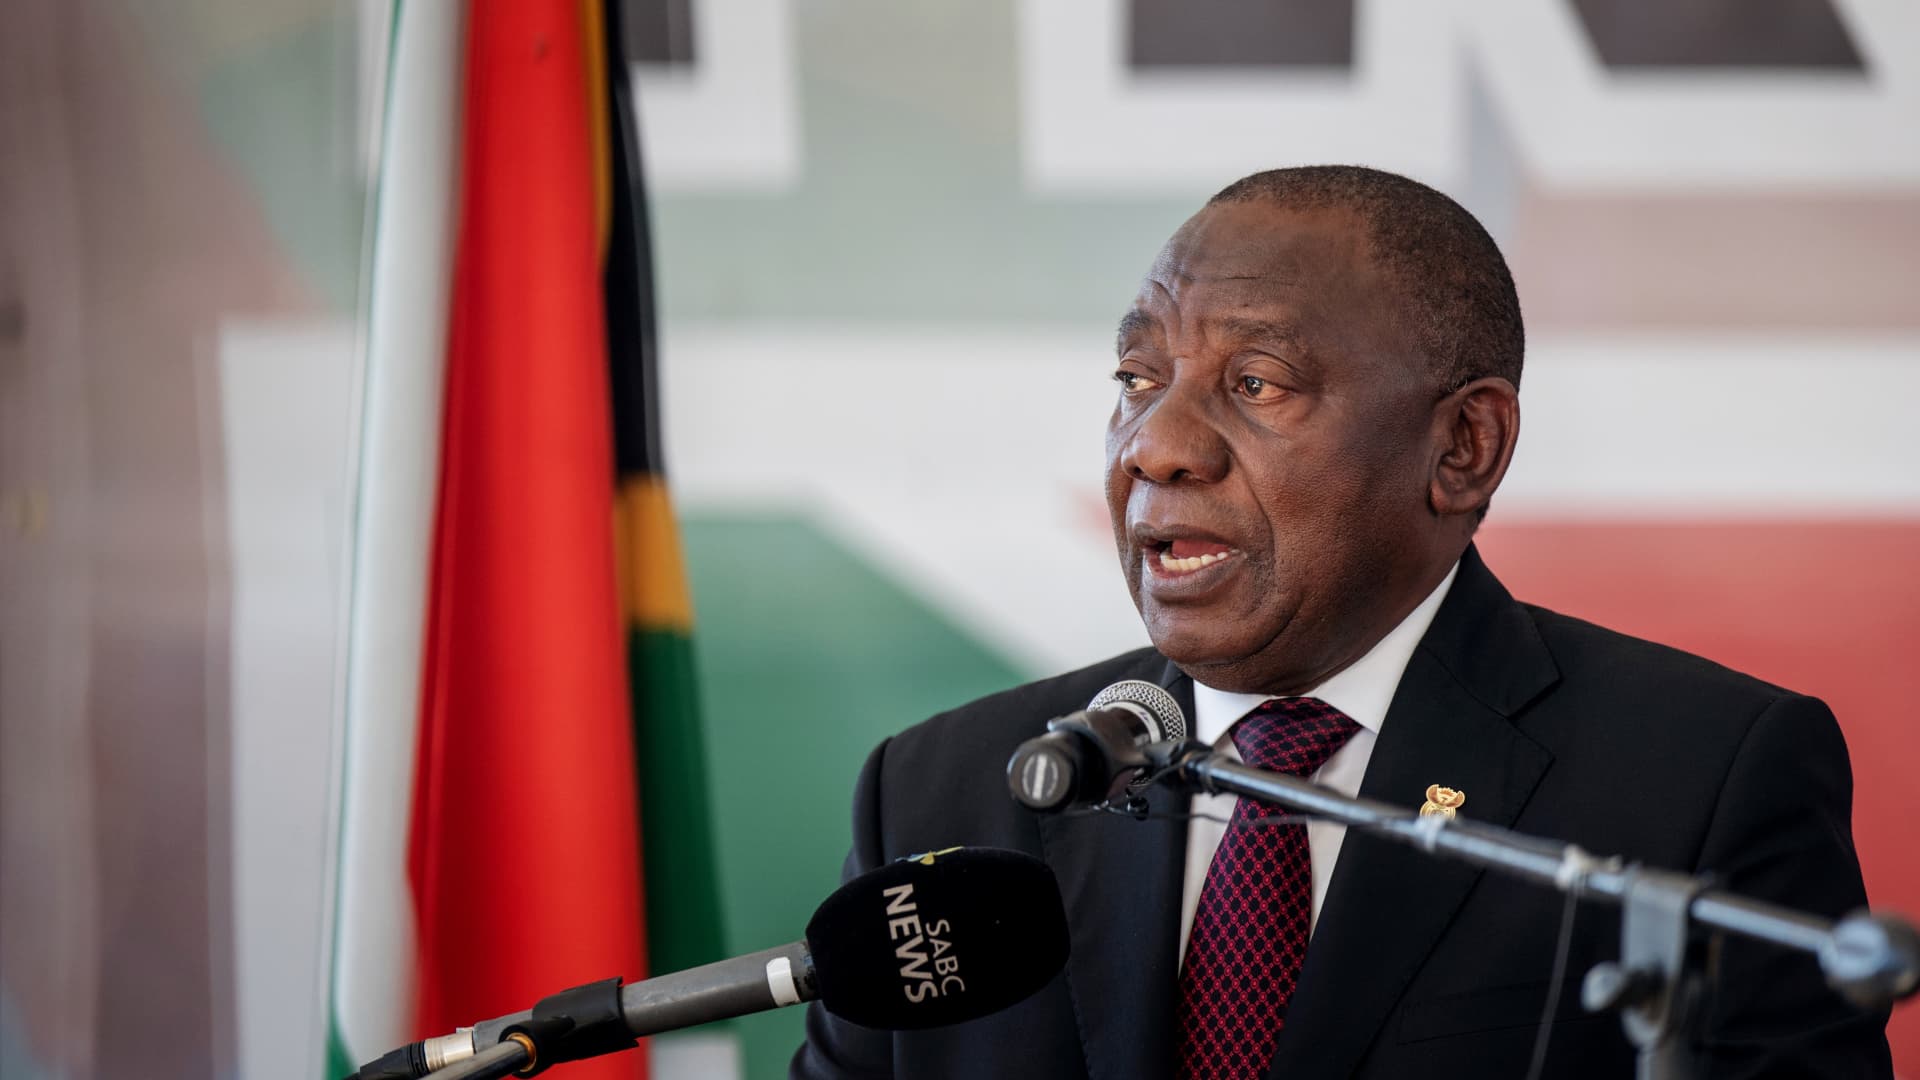 South African President Cyril Ramaphosa addresses the crowd gathered at the Miki Yili Stadium, ahead of the celebrations for the 25th anniversary of Freedom Day, in Makhanda, Eastern Cape Province on April 27, 2019.